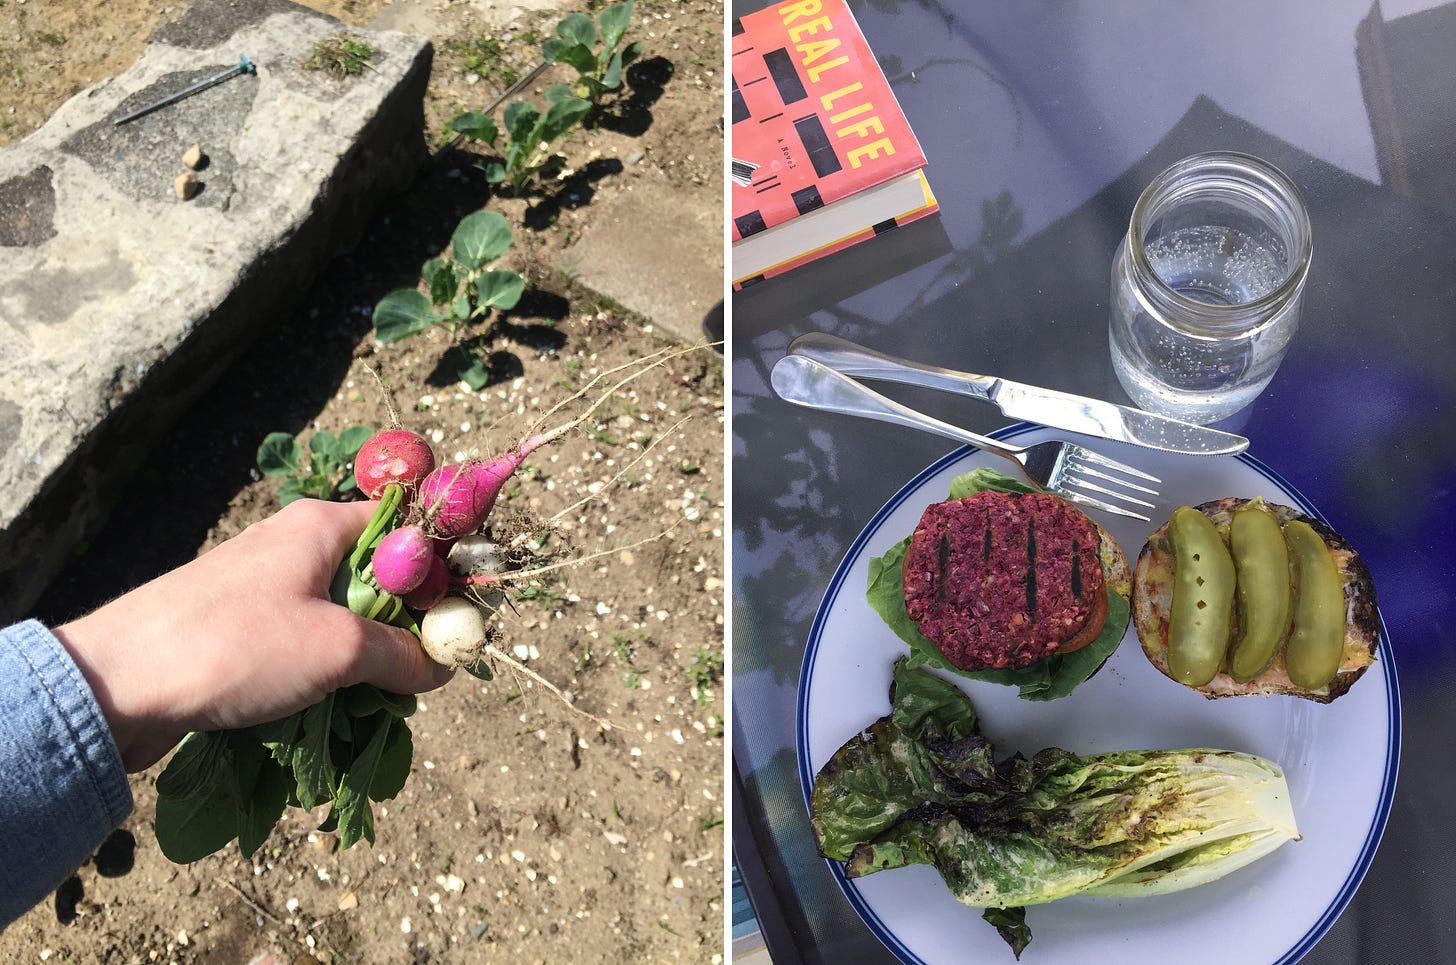 Left image: a hand holding a bunch of radishes in various colours, above a garden. Right image: a plate with half a grilled head of romaine in Caesar dressing, next to an open burger showing a pink veggie patty on one side and pickles on the other. A novel is visible in the background.